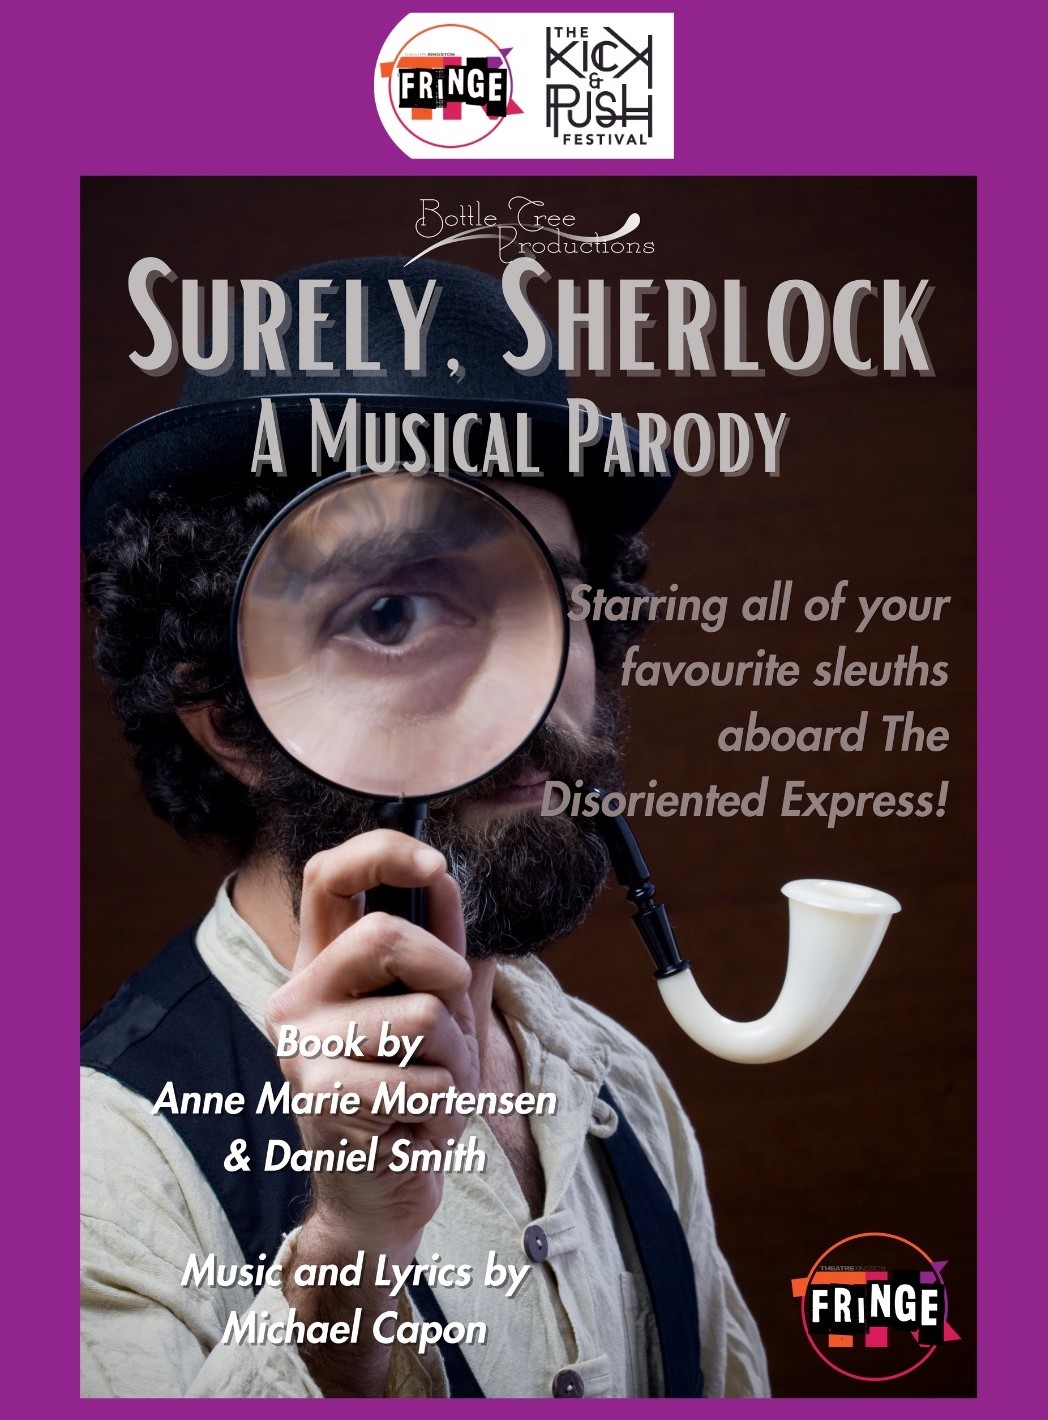 Poster for Bottle Tree Productions' 'Surely, Sherlock'. Text reads: "Bottle Tree Productions Surely, Sherlock Starring all of your favourite sleuths aboard The Disoriented Express! Book by Anne Marie Mortensen & Daniel Smith Music and Lyrics by Michael Capon"